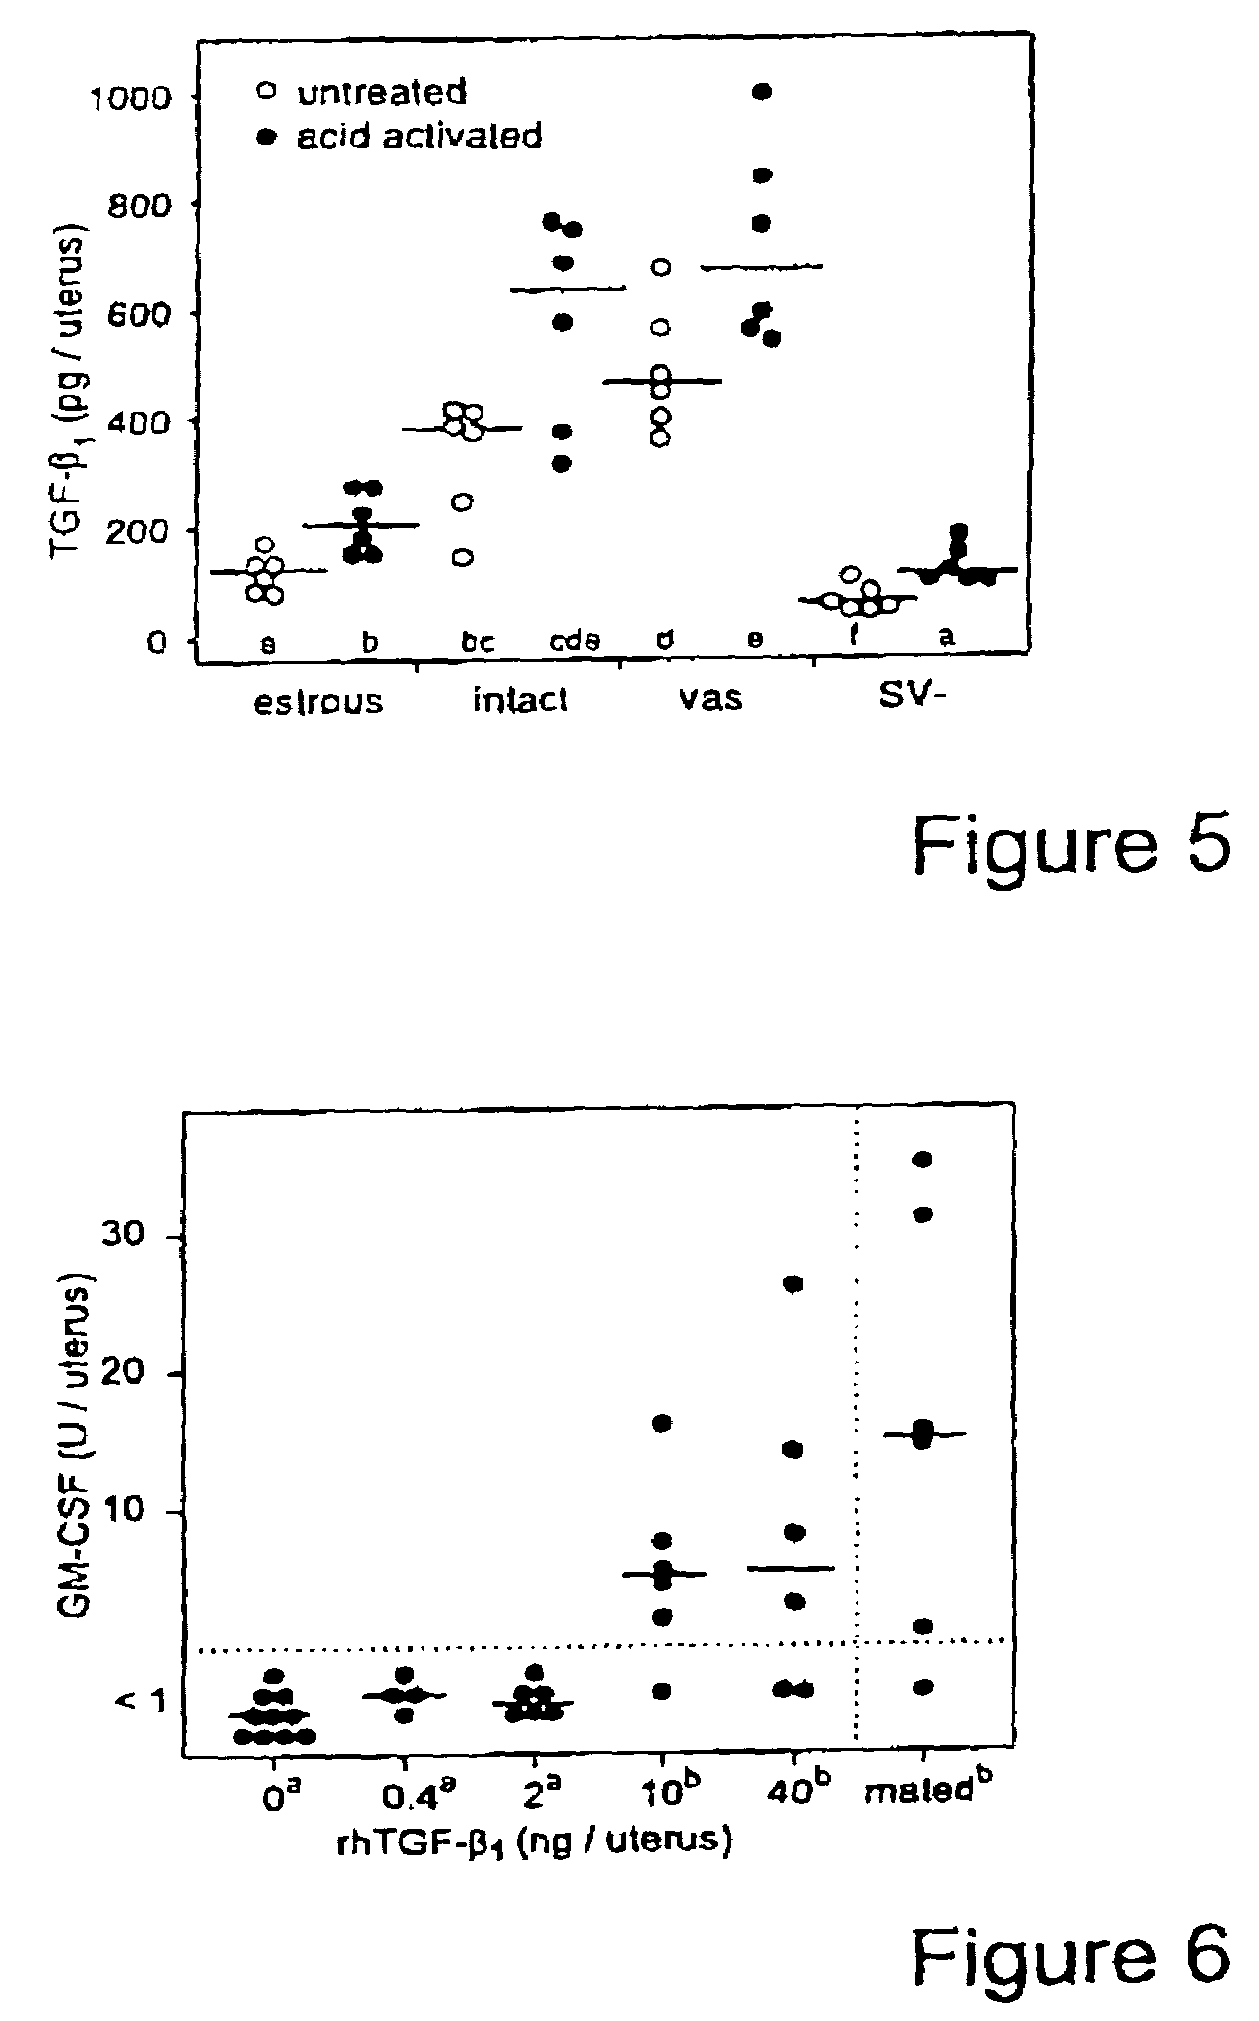 Treatment and diagnosis of infertility using TGFβ or activin